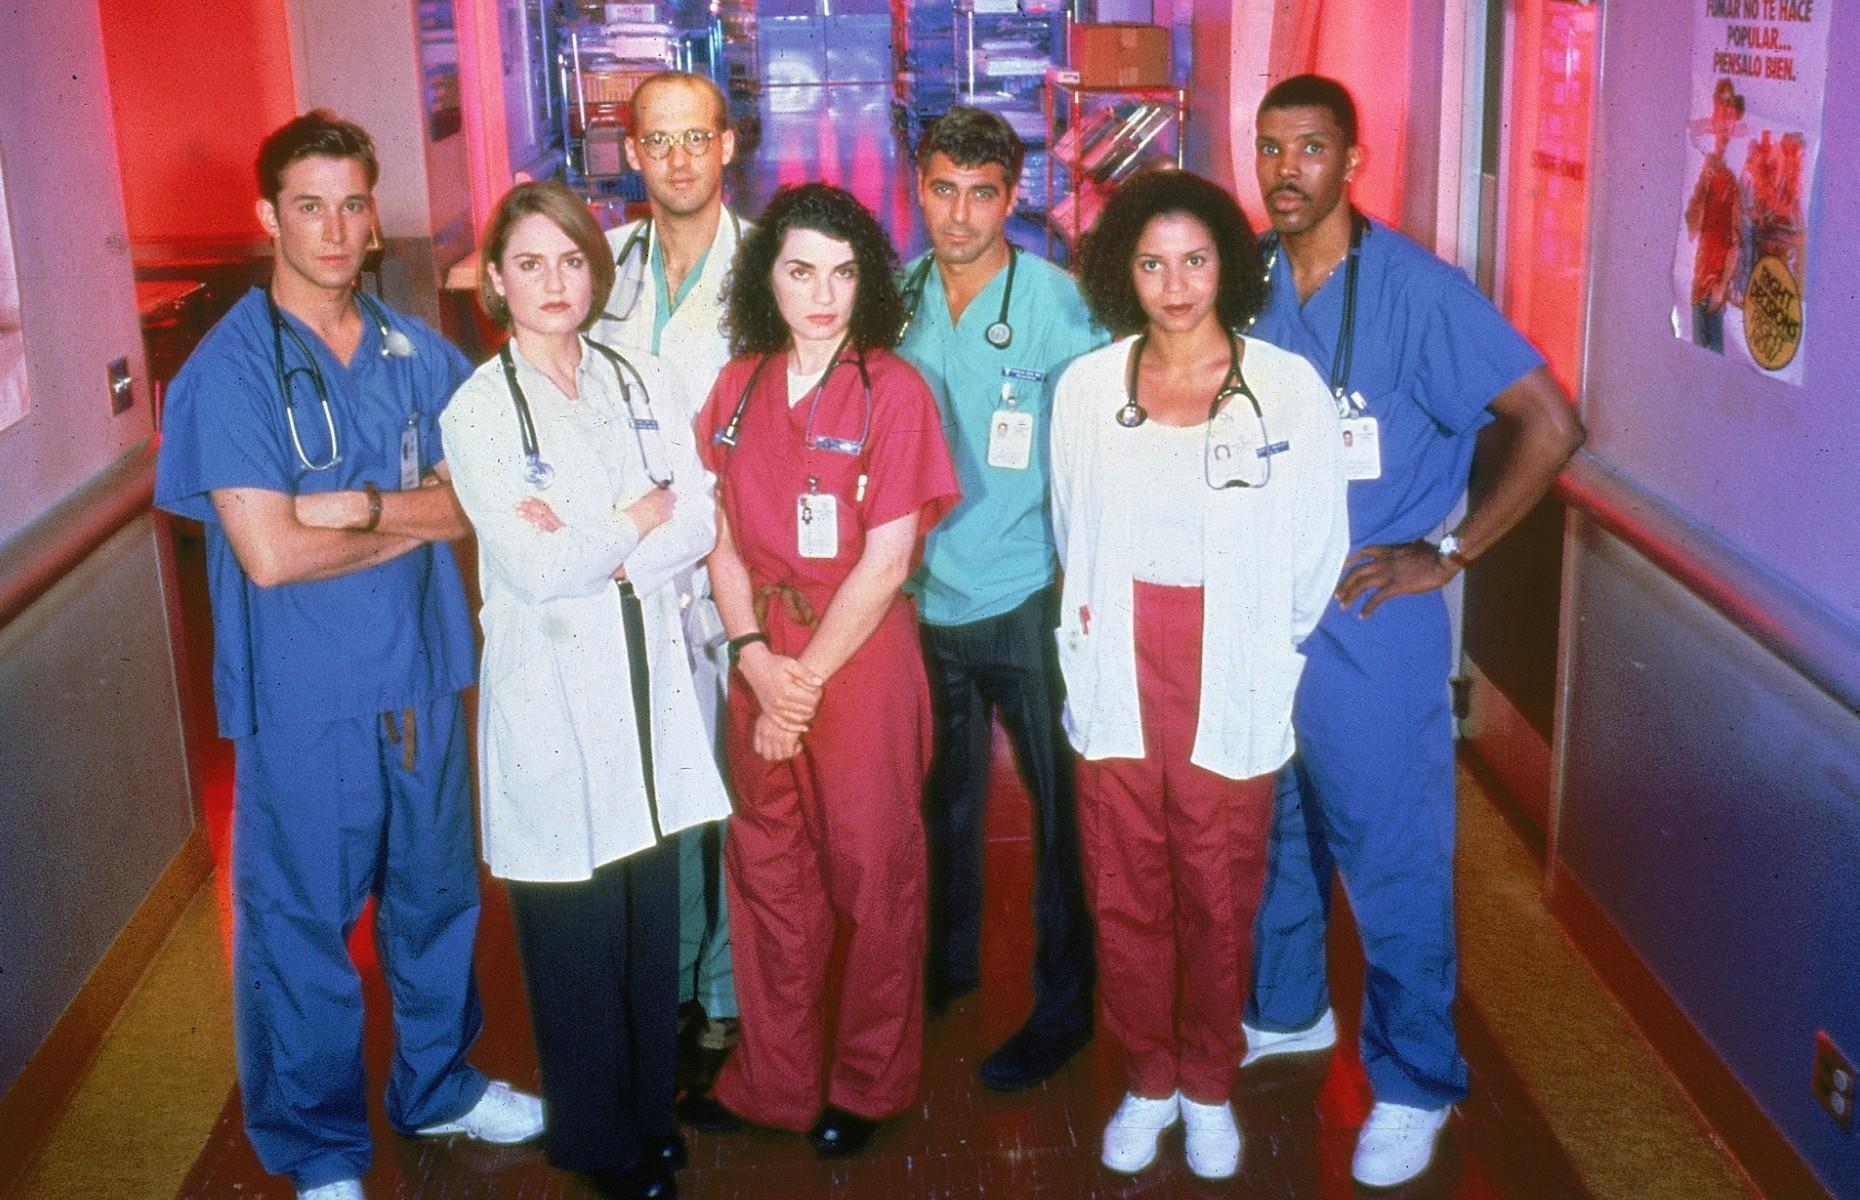 ER cast members ranked by their fortunes